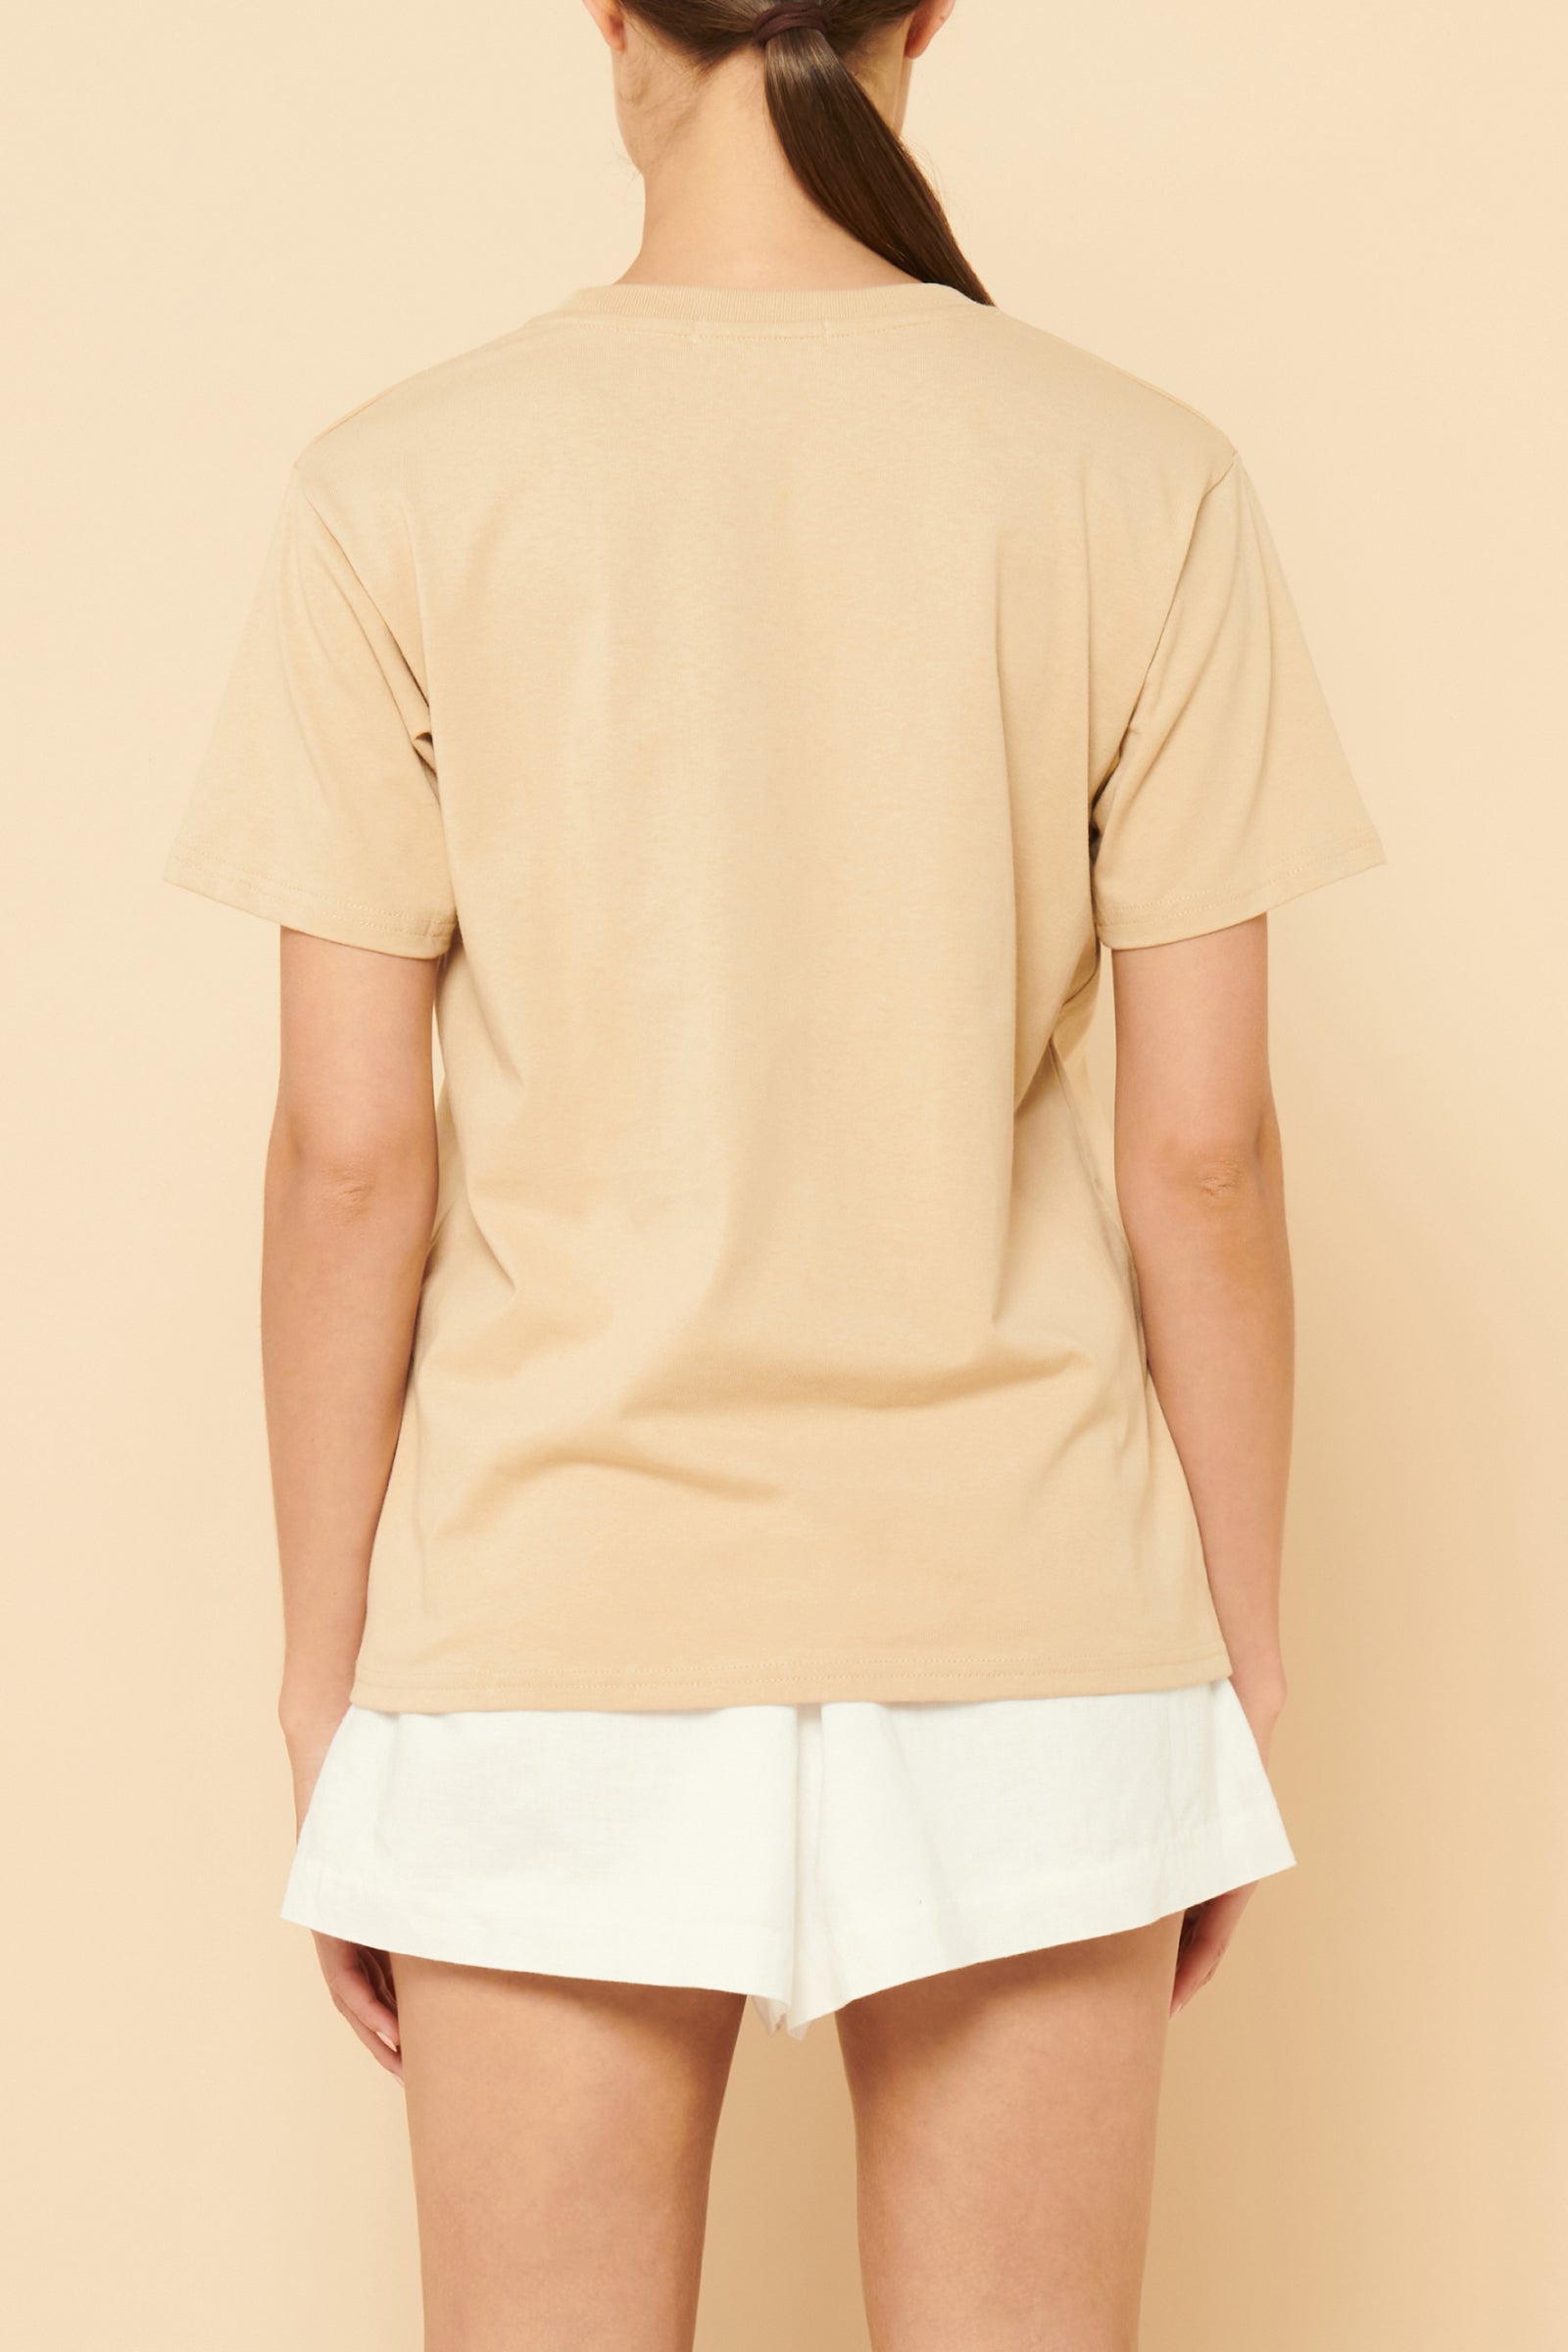 Nude Lucy Nude Organic Heritage Tee in a Light Brown Latte Colour